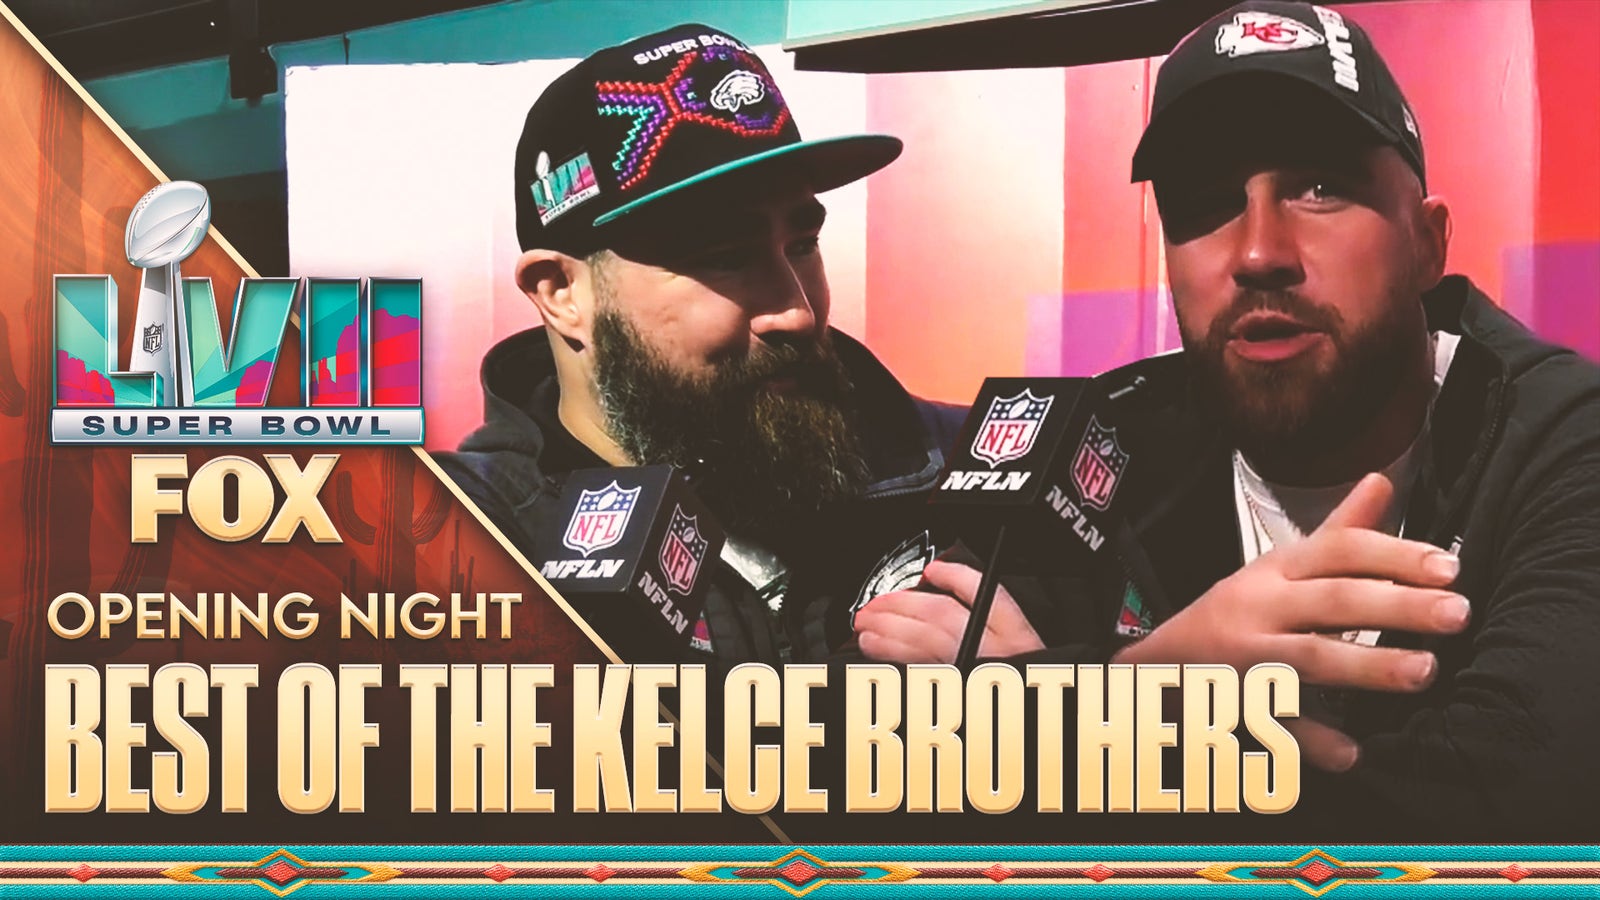 Best of Kelce bros. at Super Bowl Opening Night 